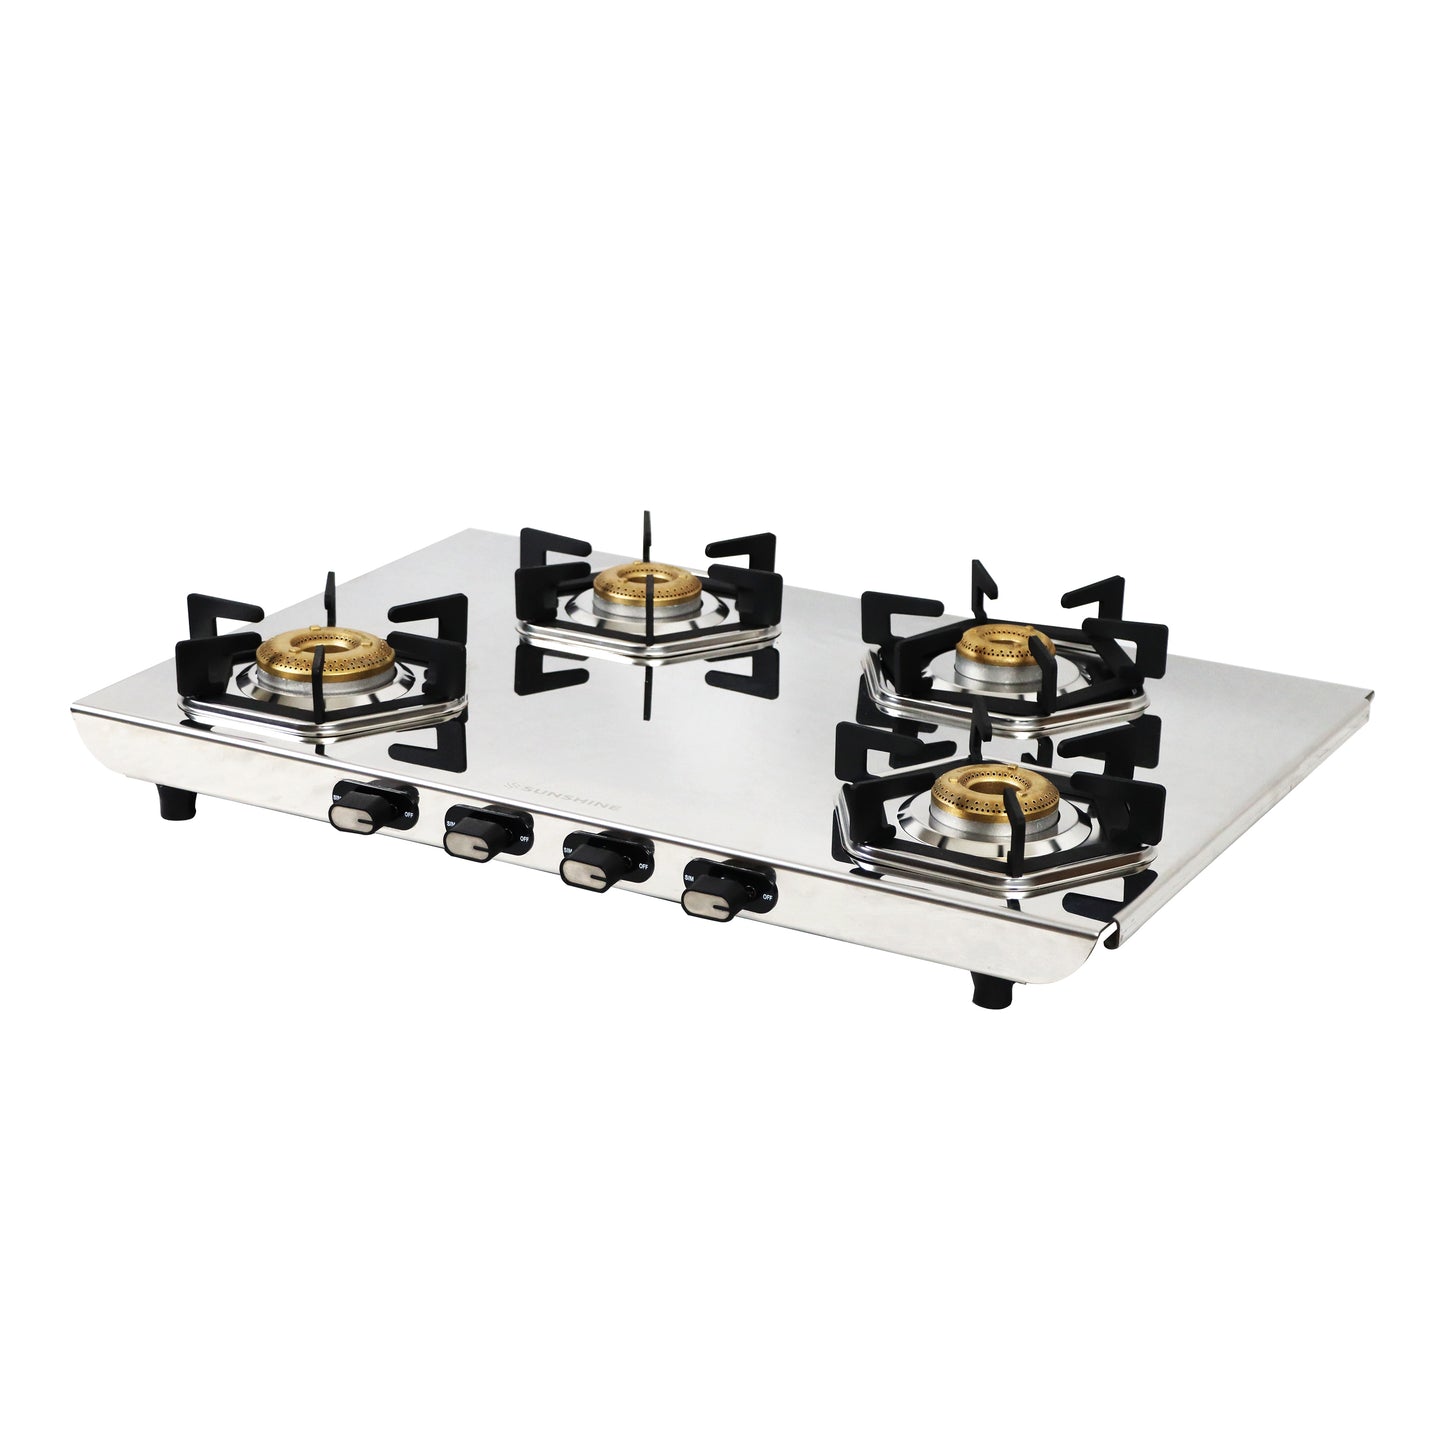 Sunshine Enzo Stainless Steel Cooktop, ISI Certified Manual Ignition 4 Burner Gas Stove, 2 Years General Warranty